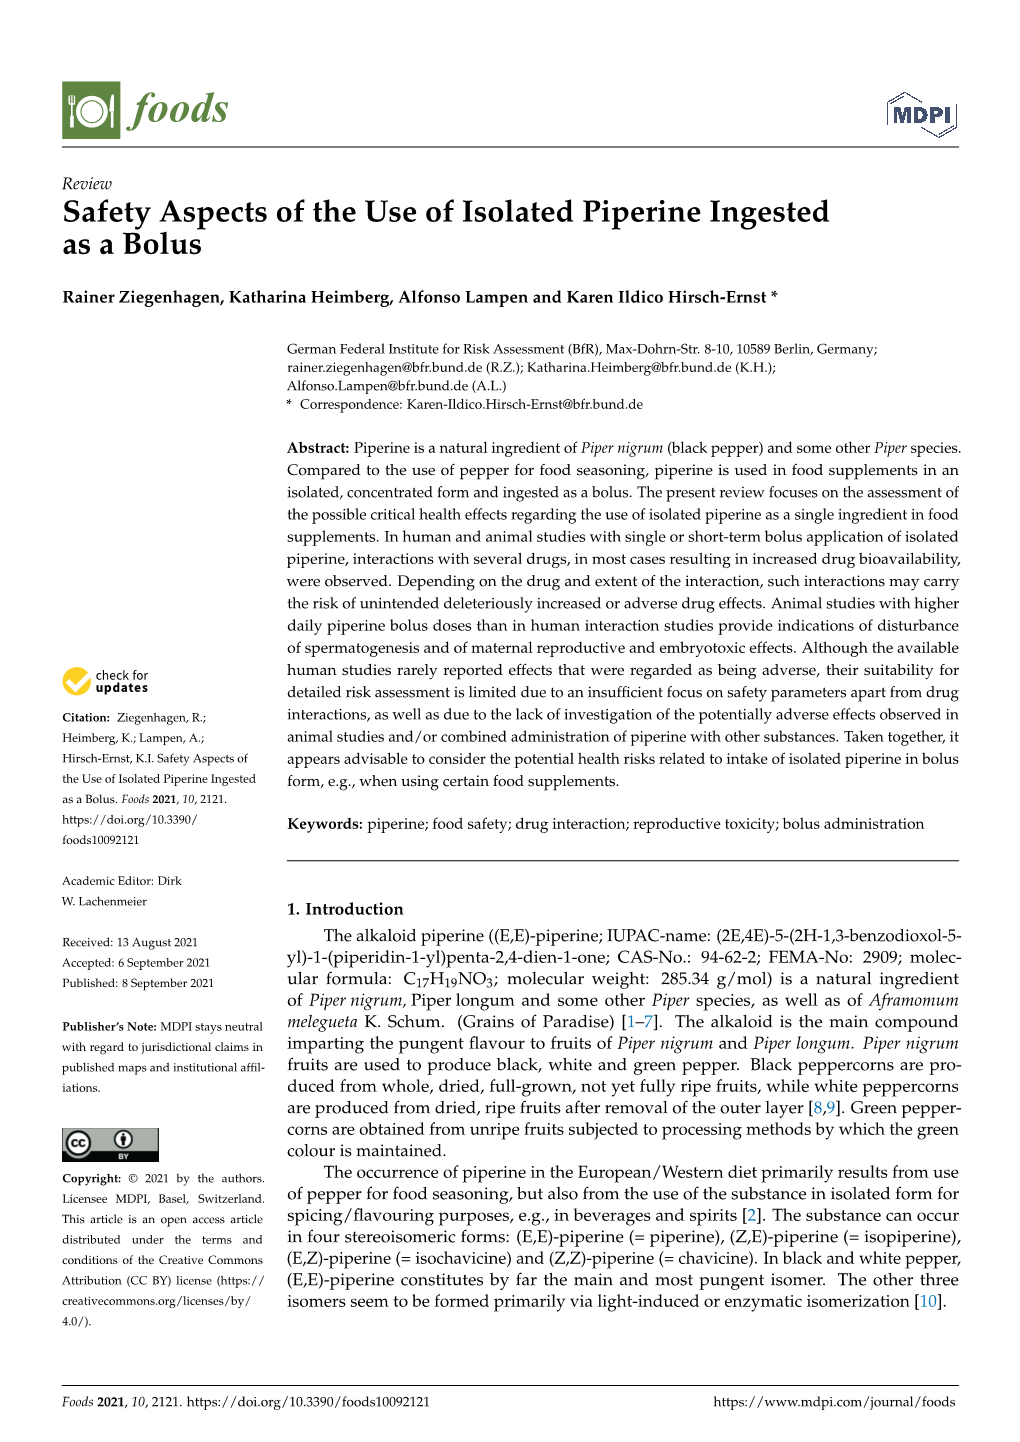 Safety Aspects of the Use of Isolated Piperine Ingested As a Bolus